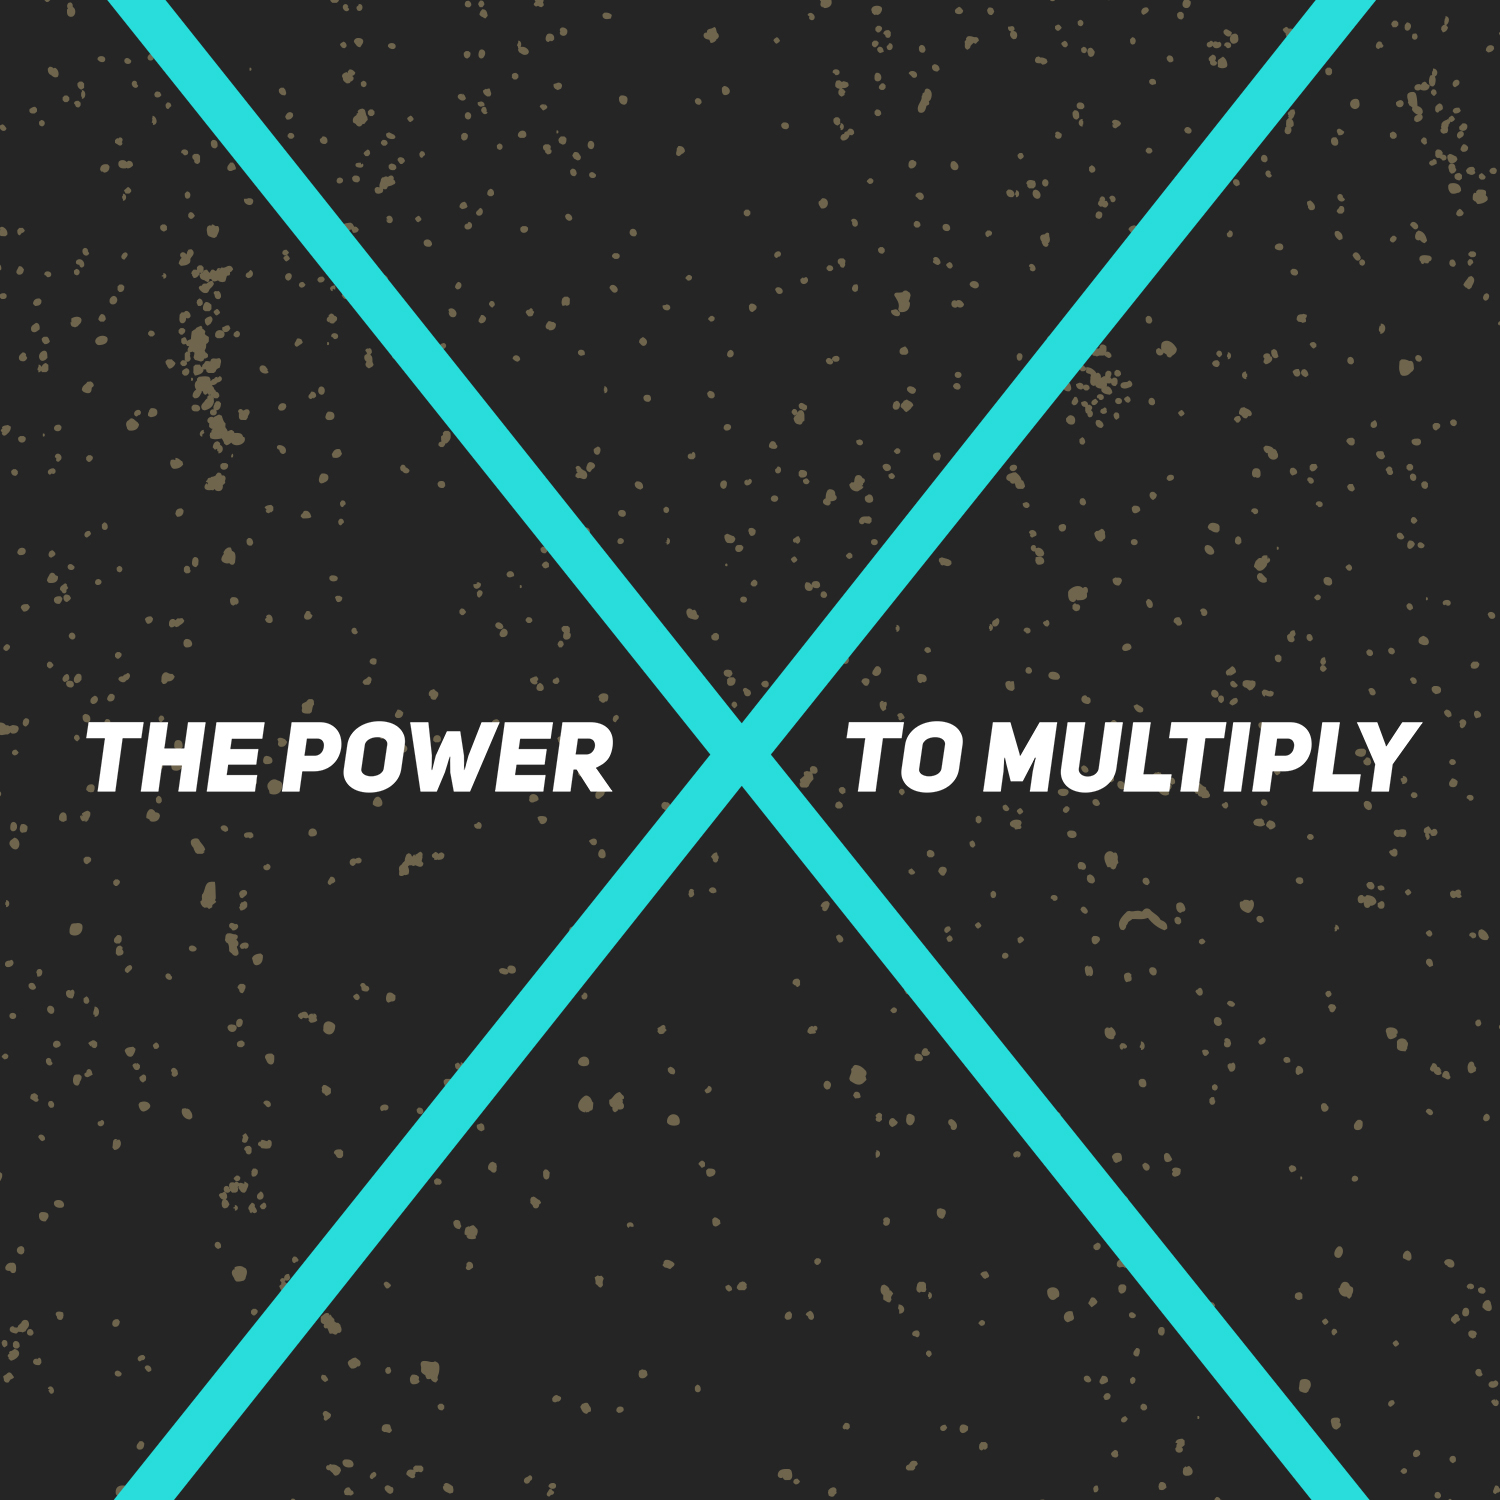 The Power to Multiply - Part 1